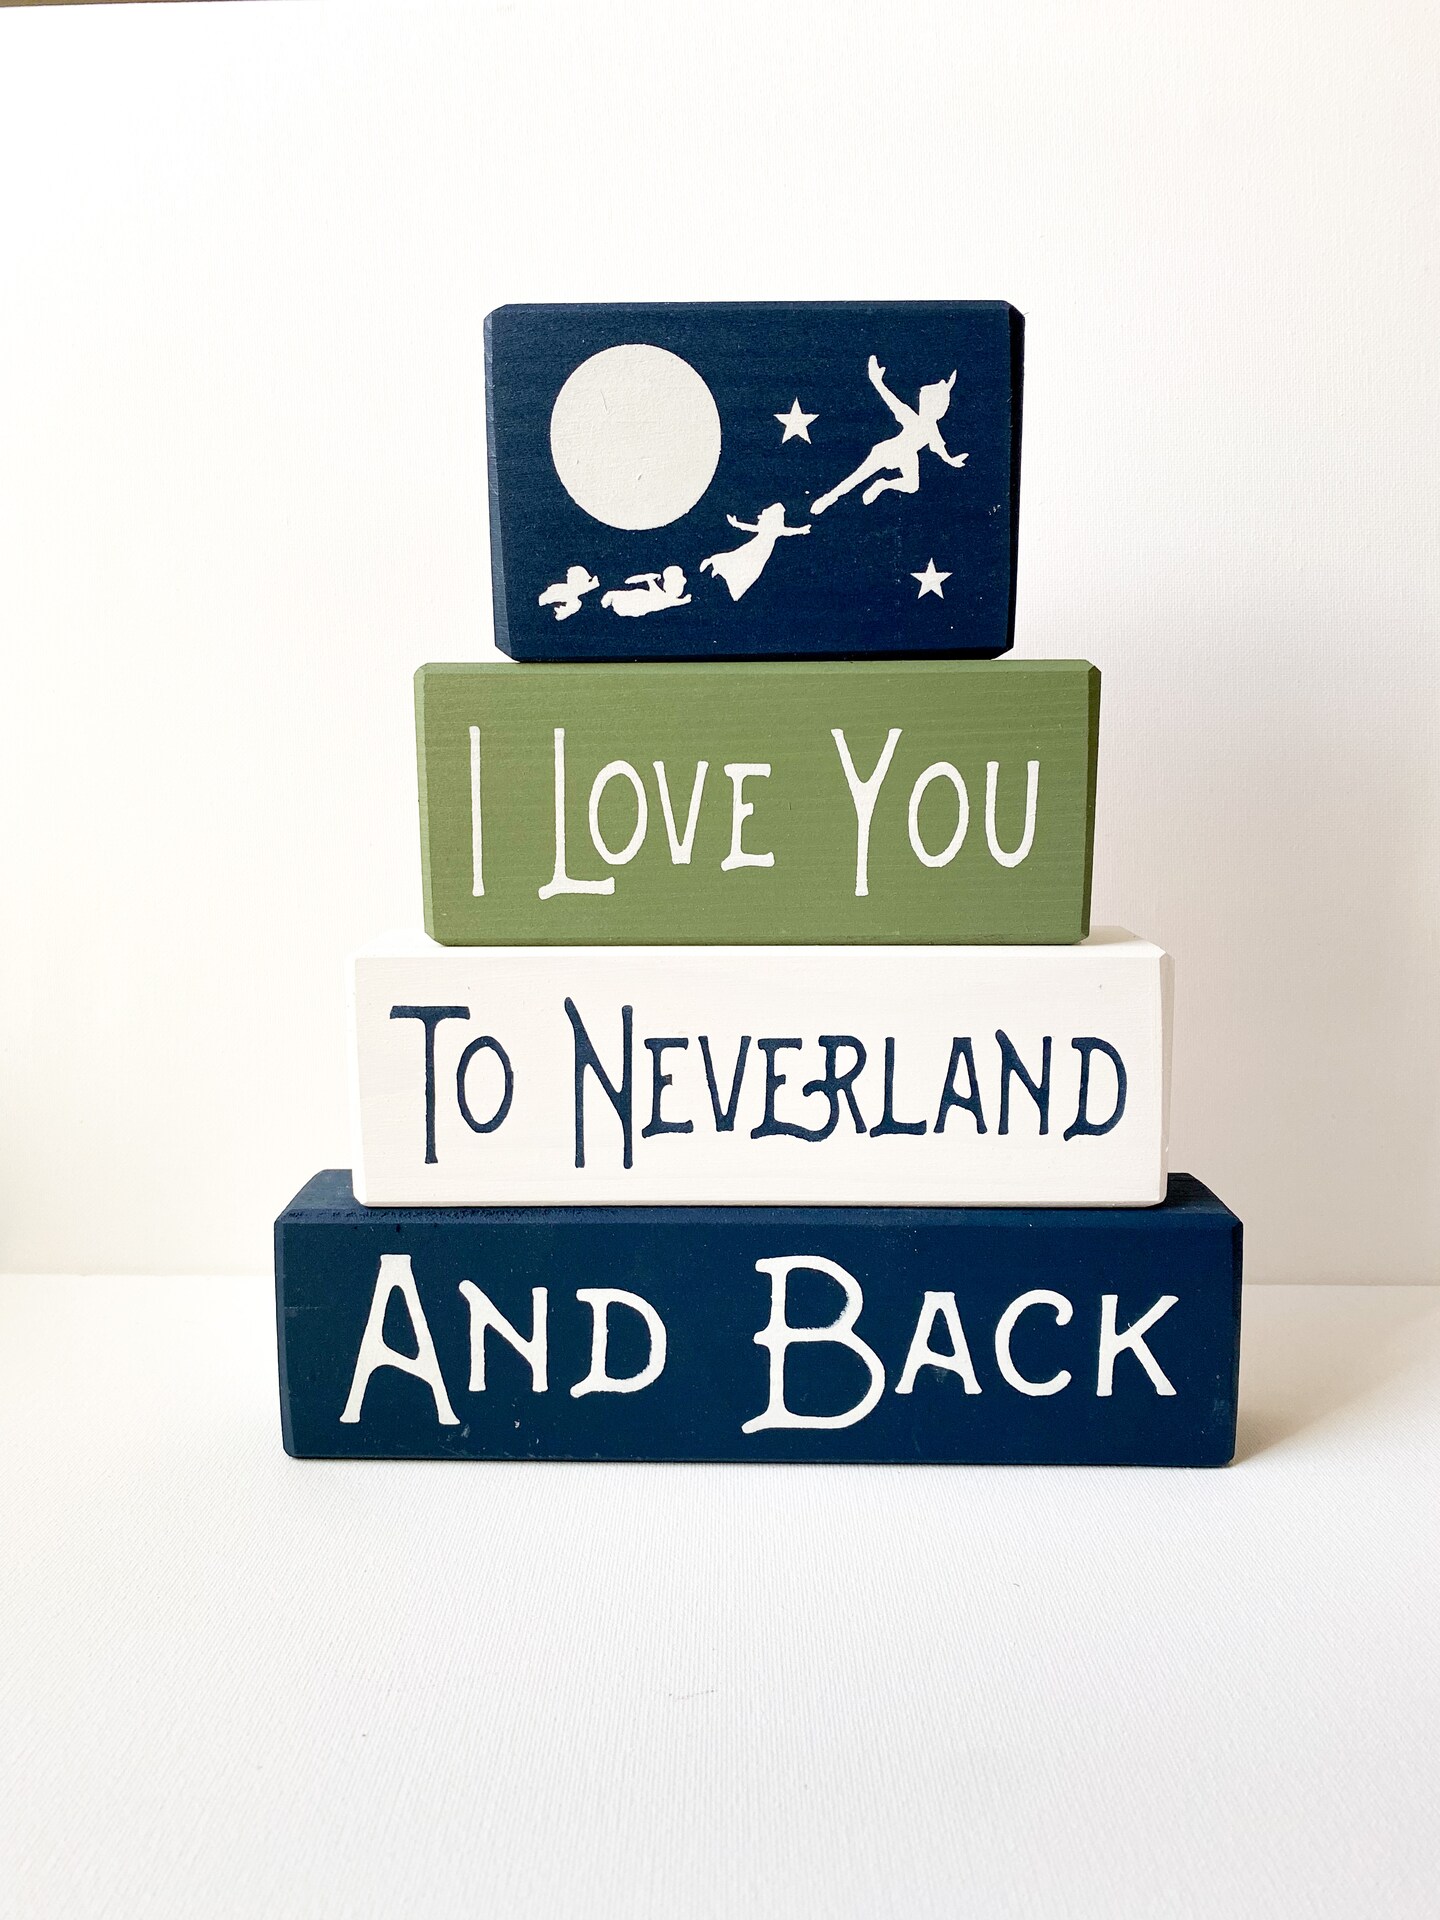 Peter Pan, I love you to Neverland and back | MakerPlace by Michaels